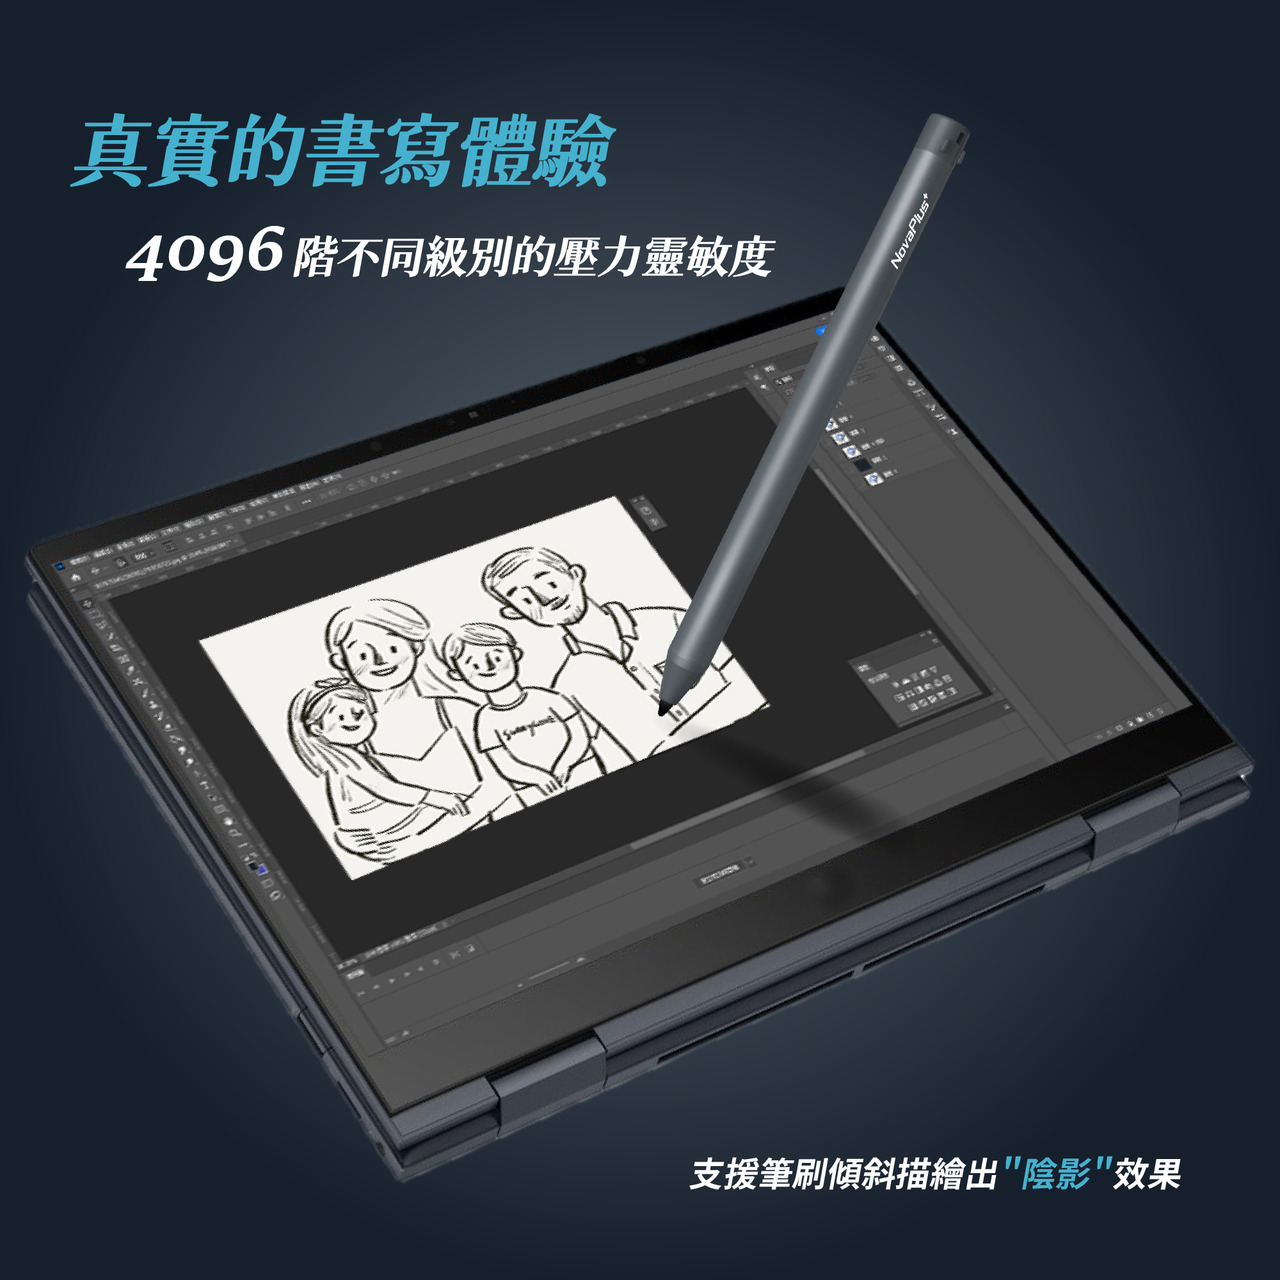 stylus pen for windows, android, surface